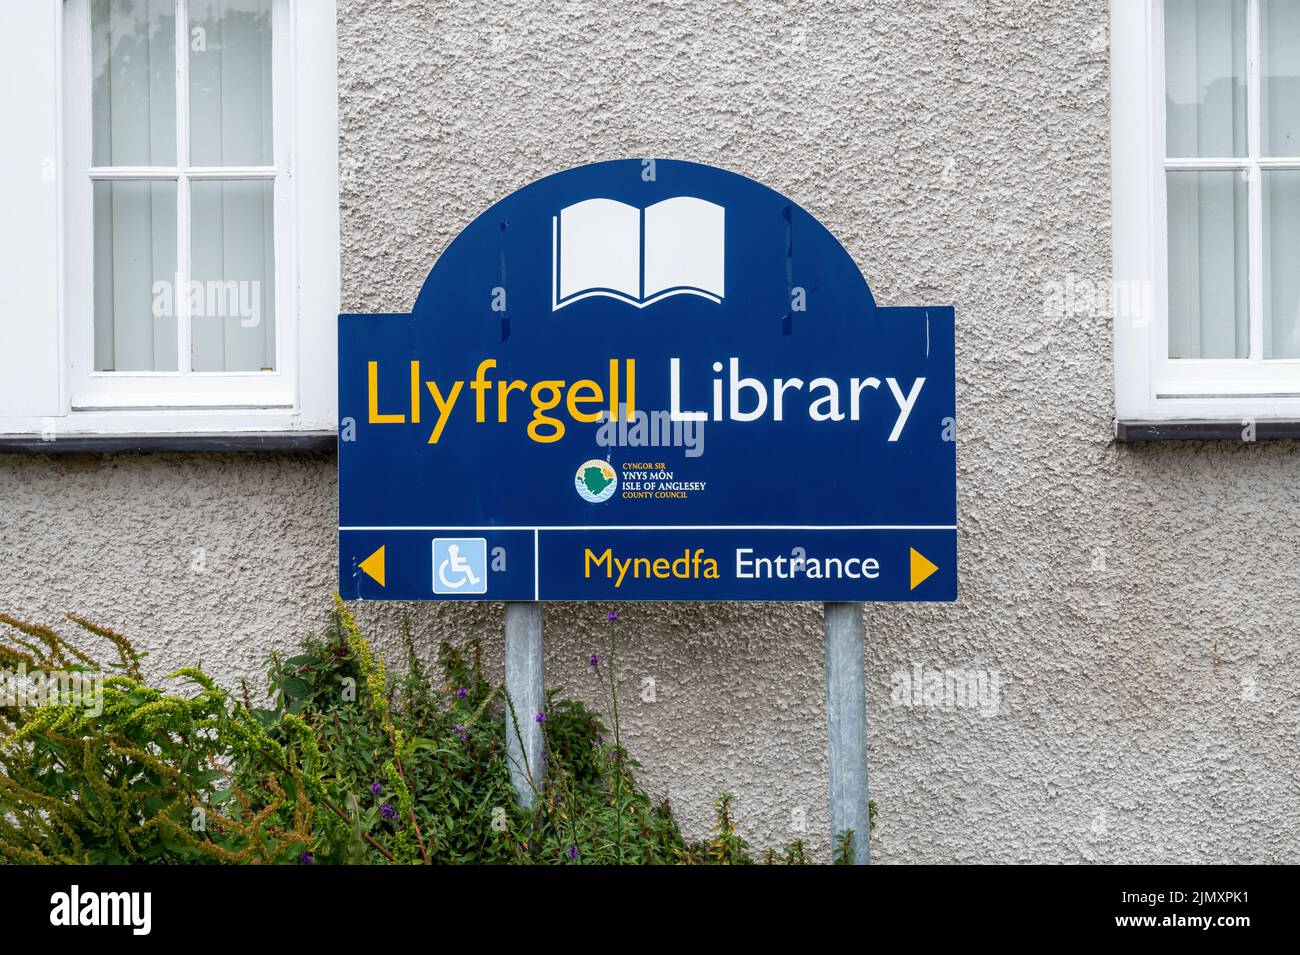 Beaumaris, UK- July 8, 2022: The sign for Llyfrgell Library in Beaumaris on the island of Anglesey Wales Stock Photo